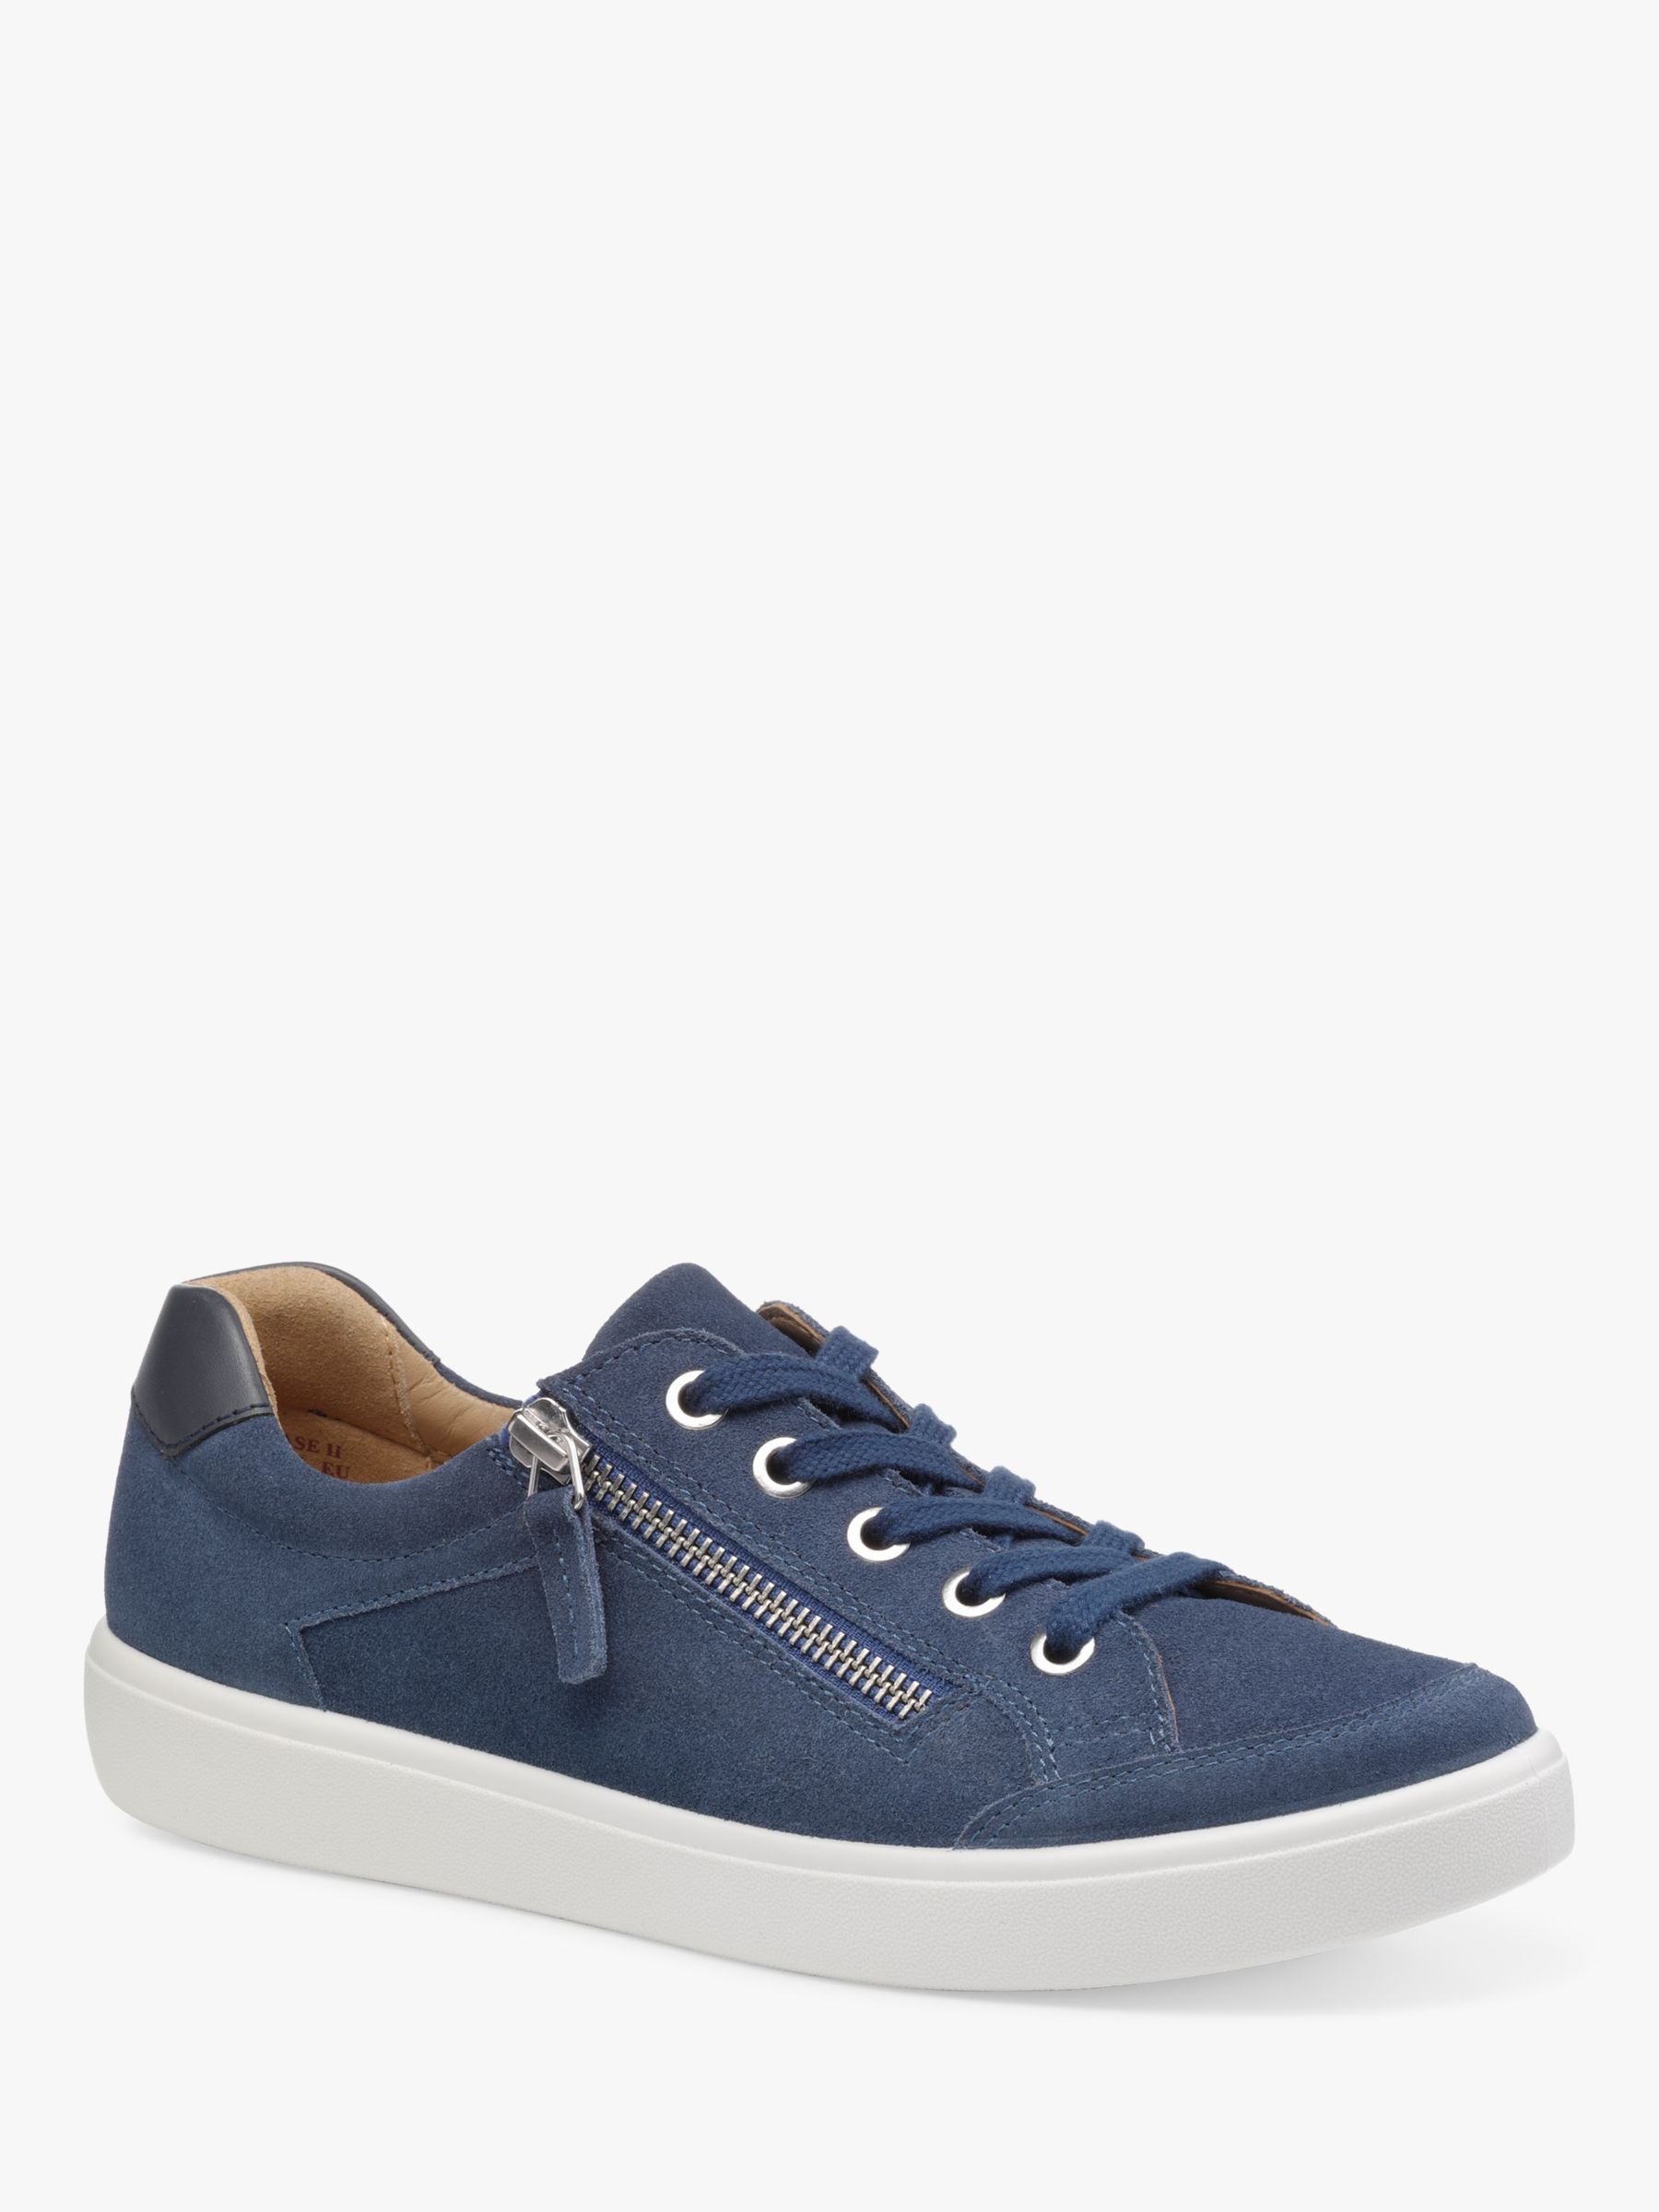 Buy Hotter Chase II Suede Zip and Go Trainers, Denim Blue Online at johnlewis.com